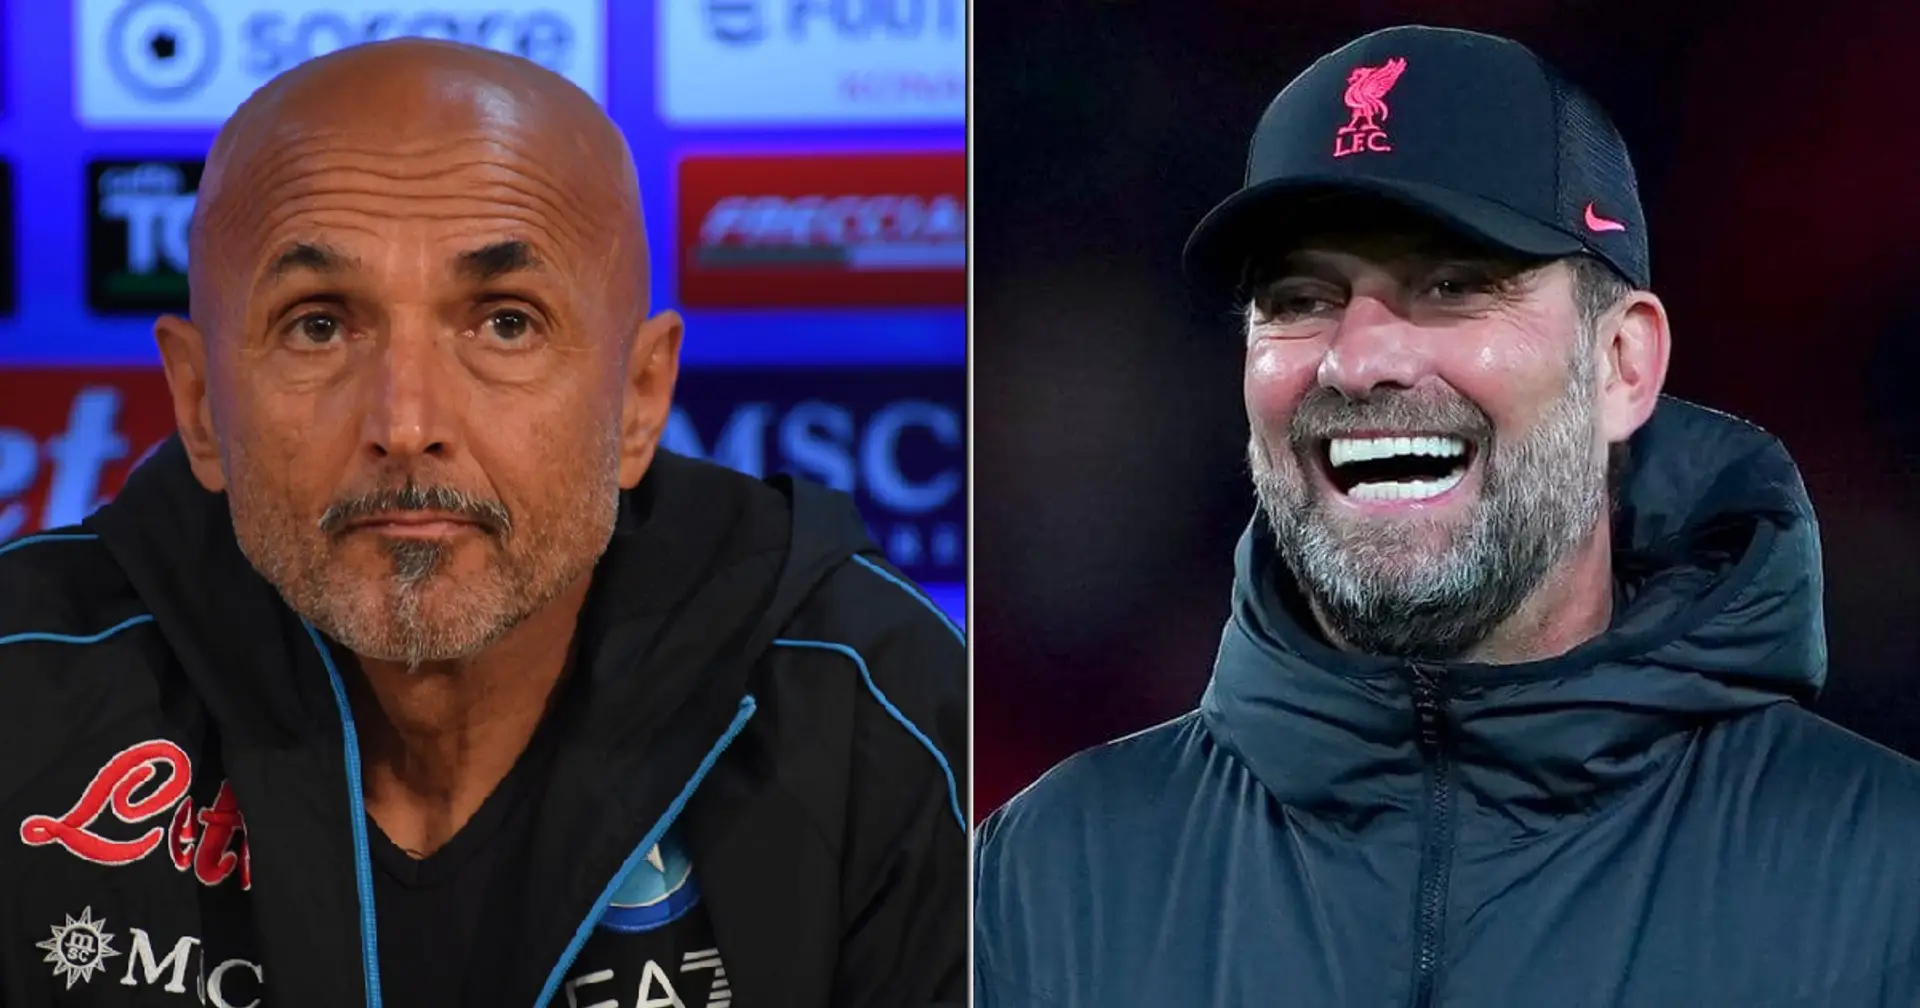 'There's nobody quite like him': Spalletti tips hat to Klopp